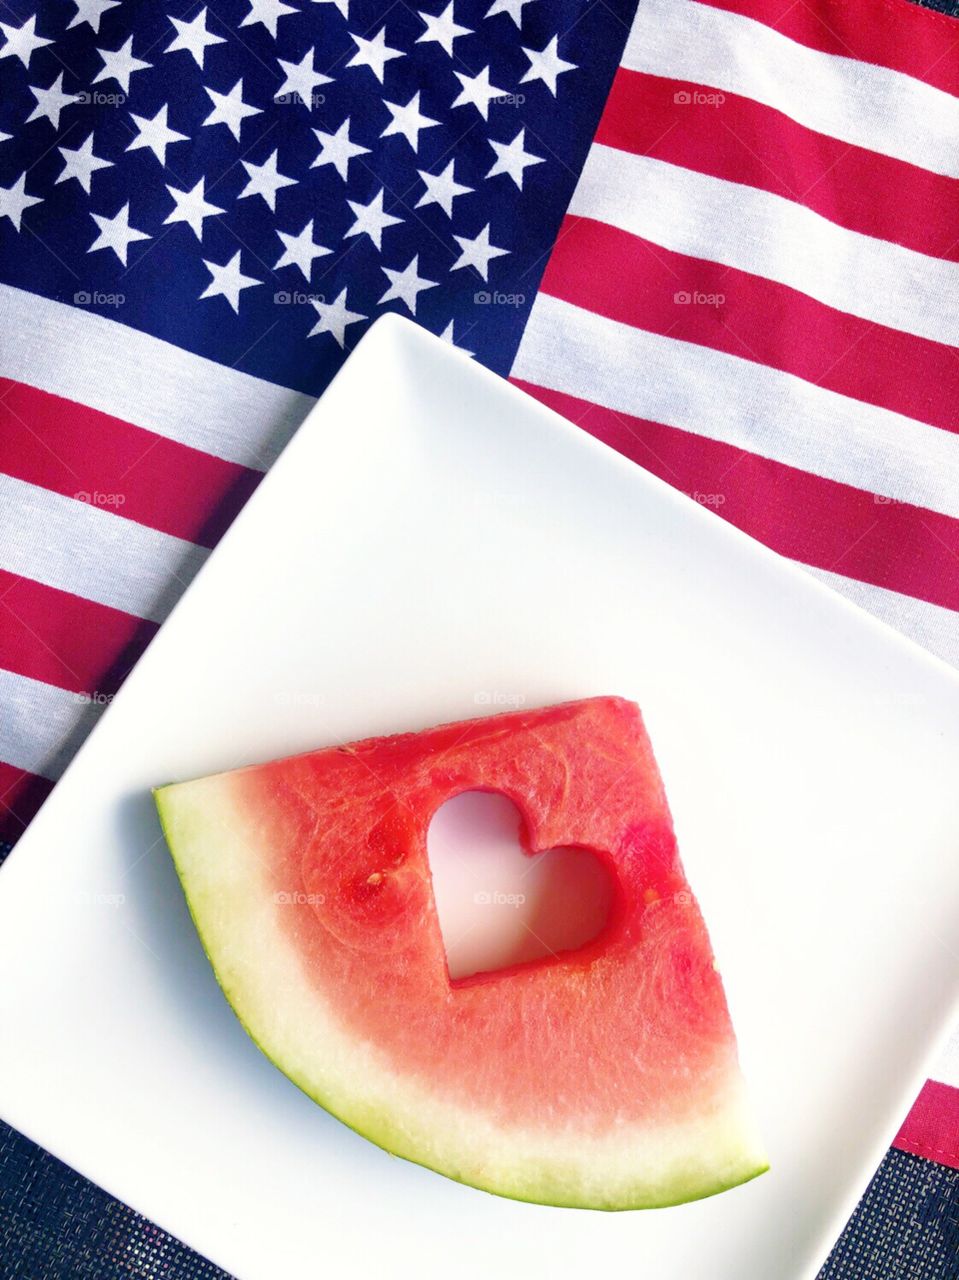 It’s an all American Summer with the red white and blue and a slice of refreshing watermelon. 